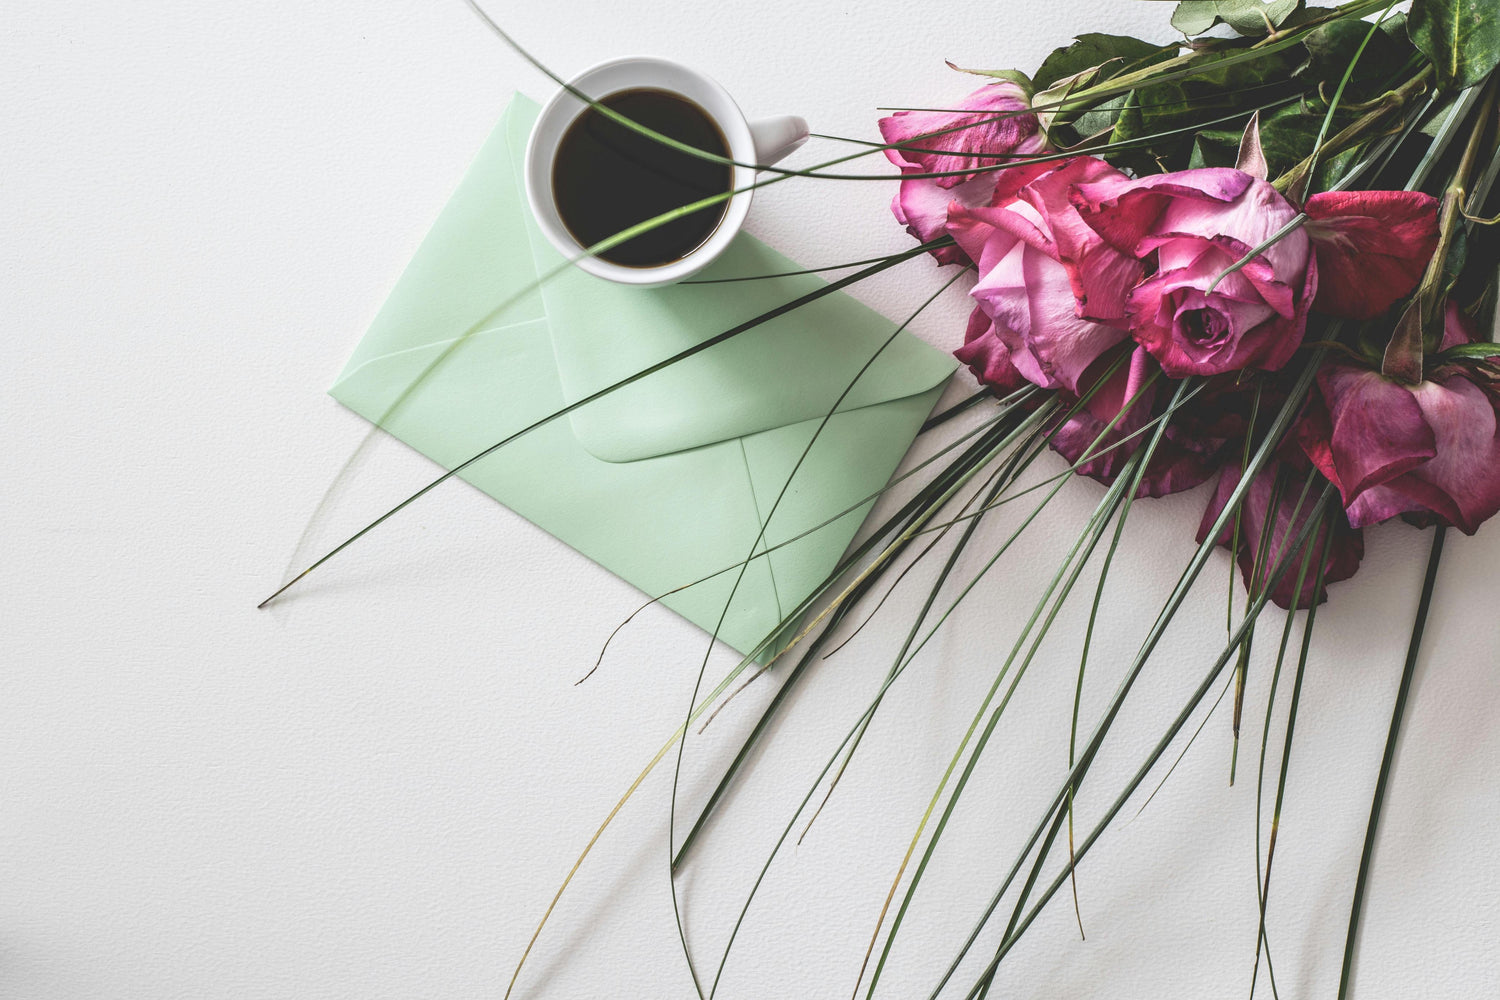 coffee, card and flowers